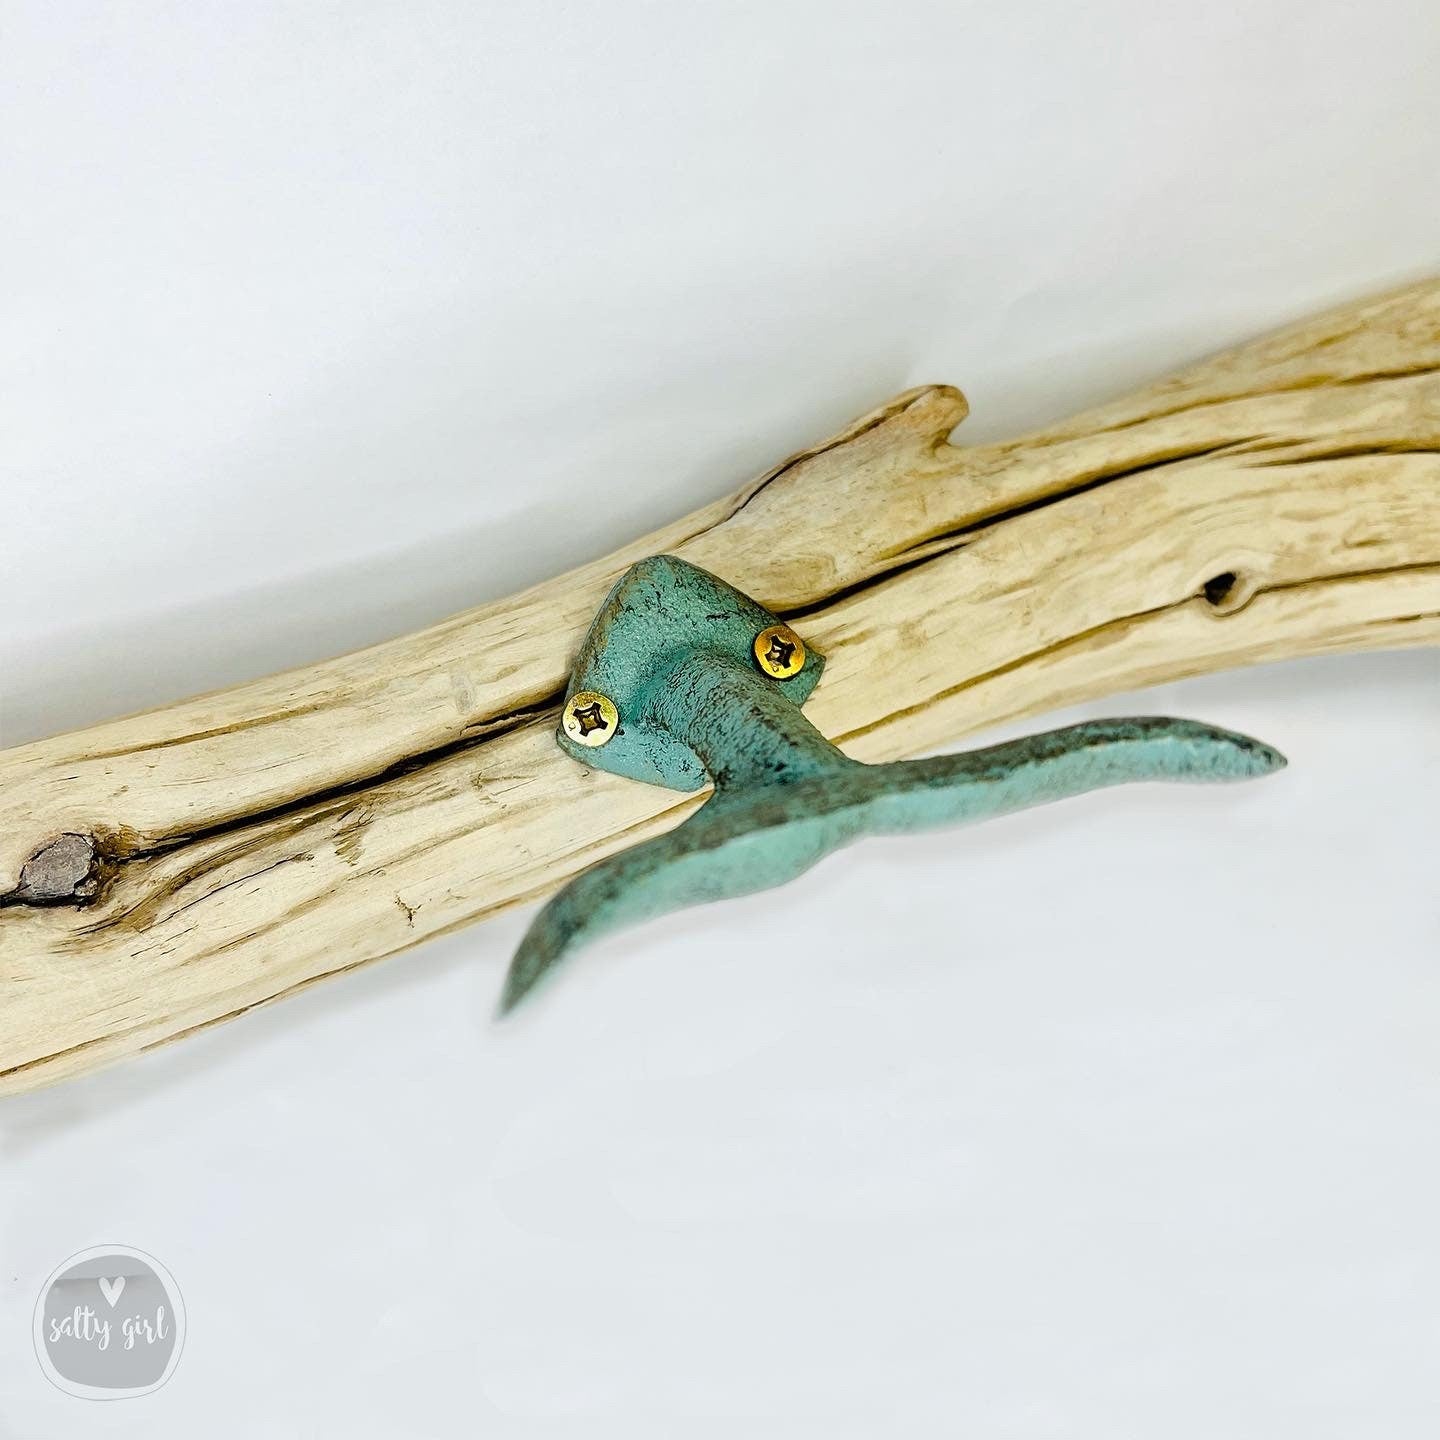 Driftwood Whale Tail Towel Rack 2-4 FT – Maine Salty Girl